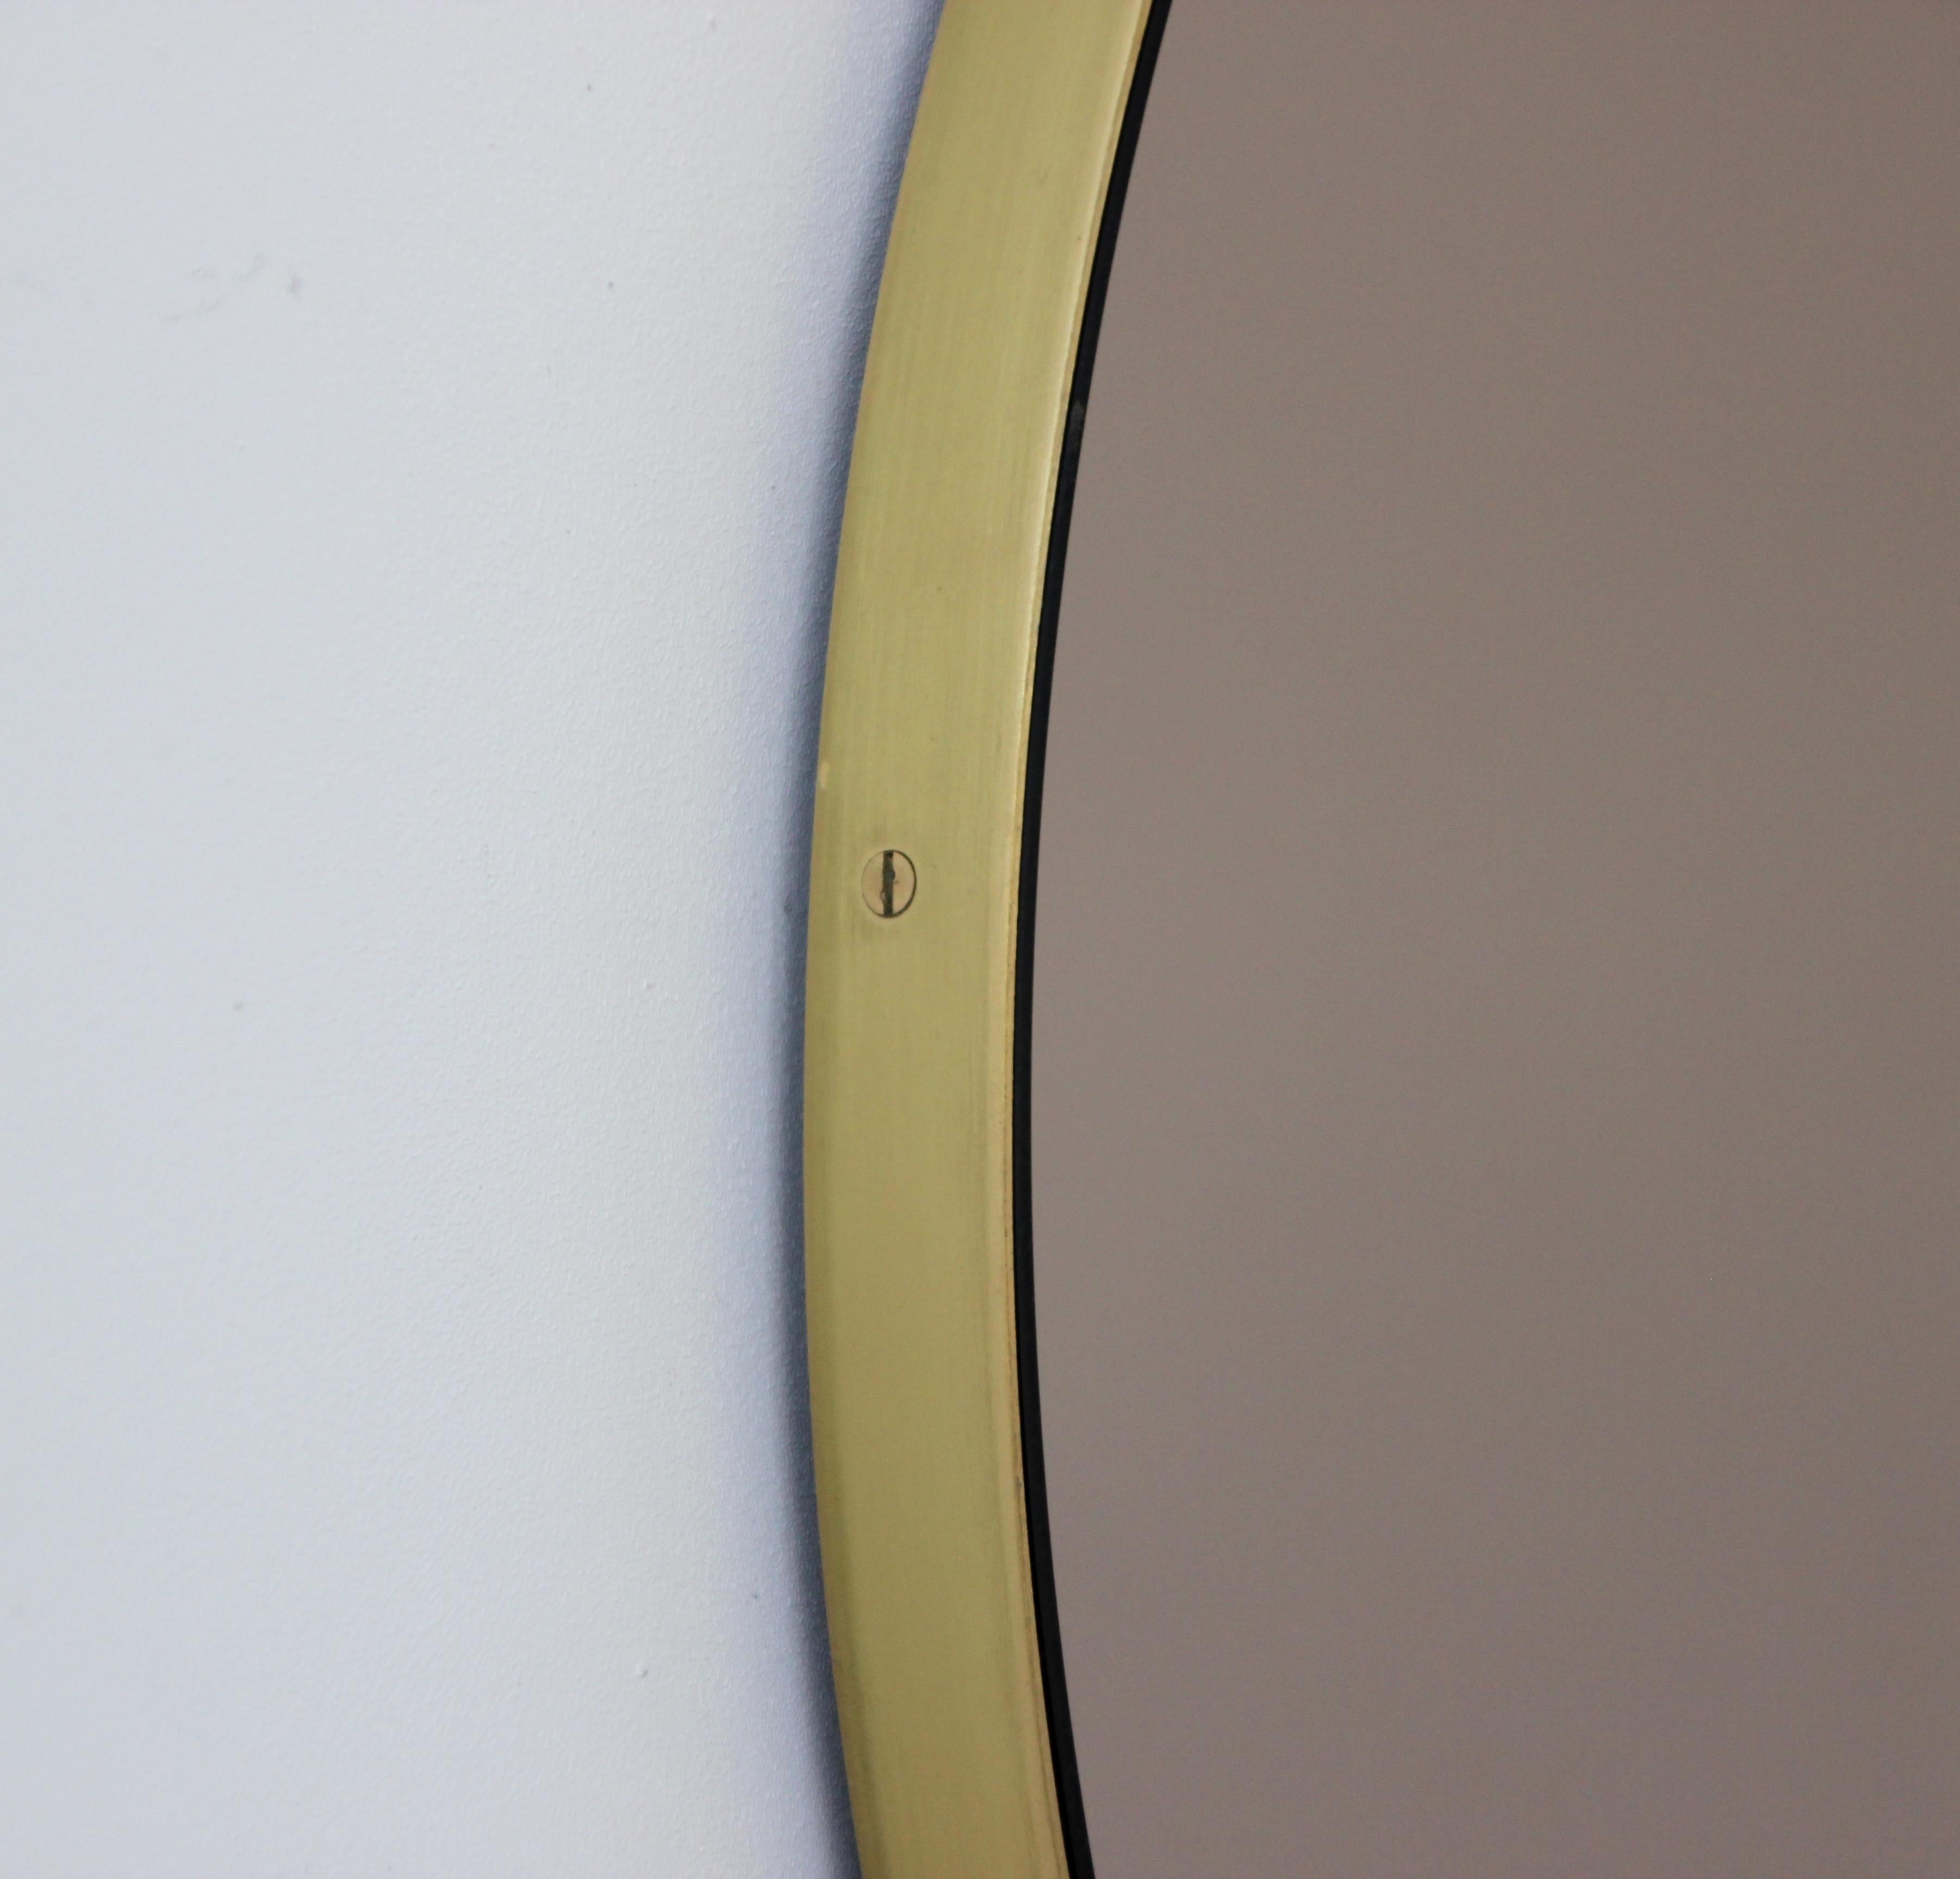 Modern Orbis Bronze Tinted Handcrafted Circular Mirror with Brass Frame, Regular For Sale